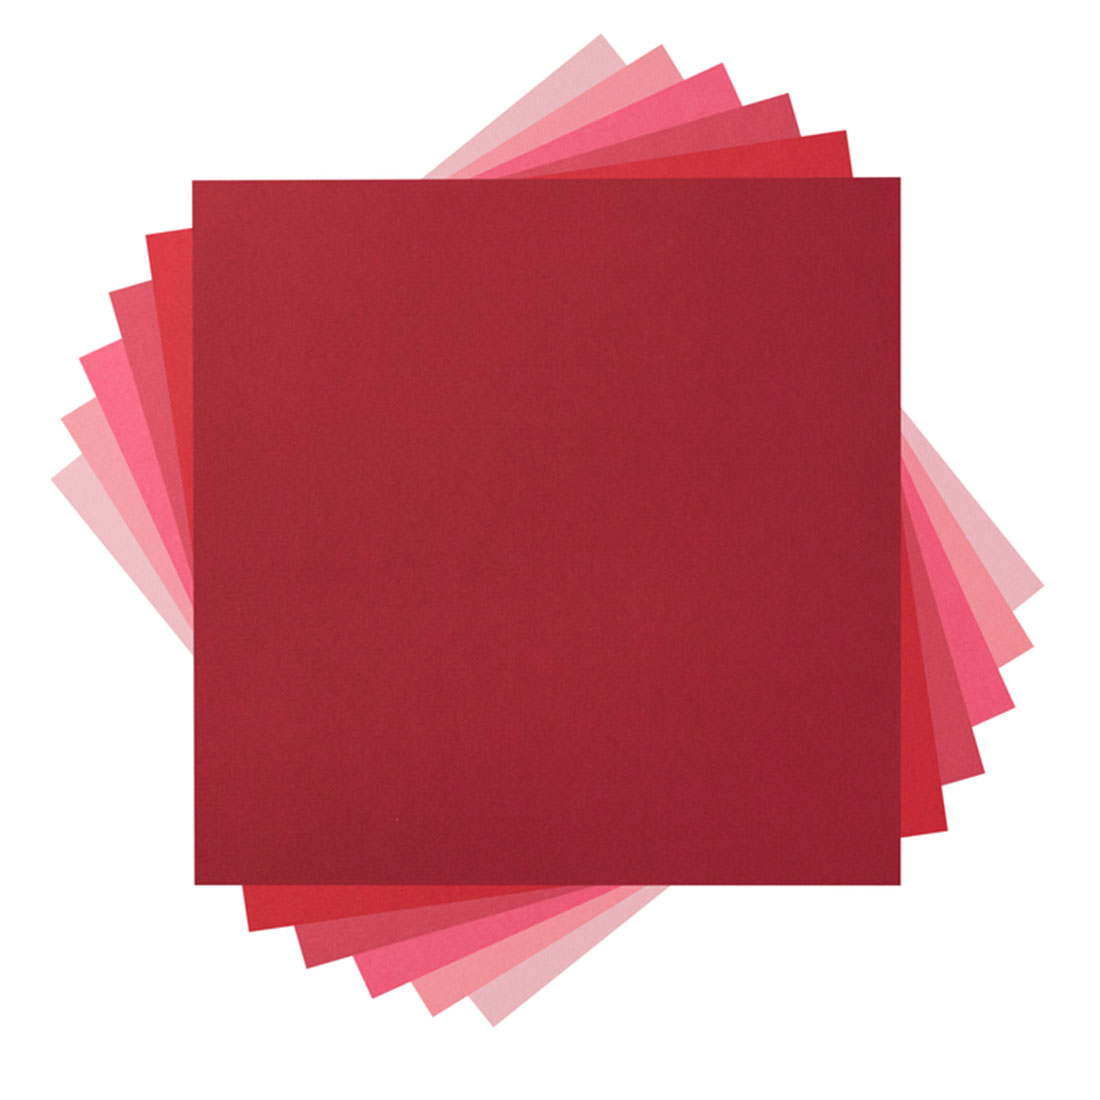  Rramorrra Red Glitter Cardstock Paper 12 x 12 15 Sheets  350gsm/130lb Heavyweight Premium Red Sparkly Construction Paper for Cricut  Machine, Christmas, Craft, DIY Projects, Party Decorations : Arts, Crafts 